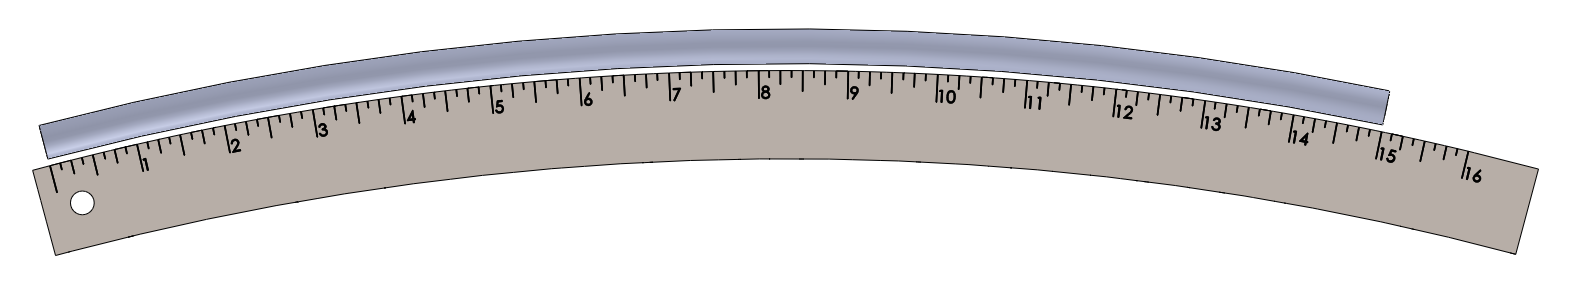 Measure in world with curvature